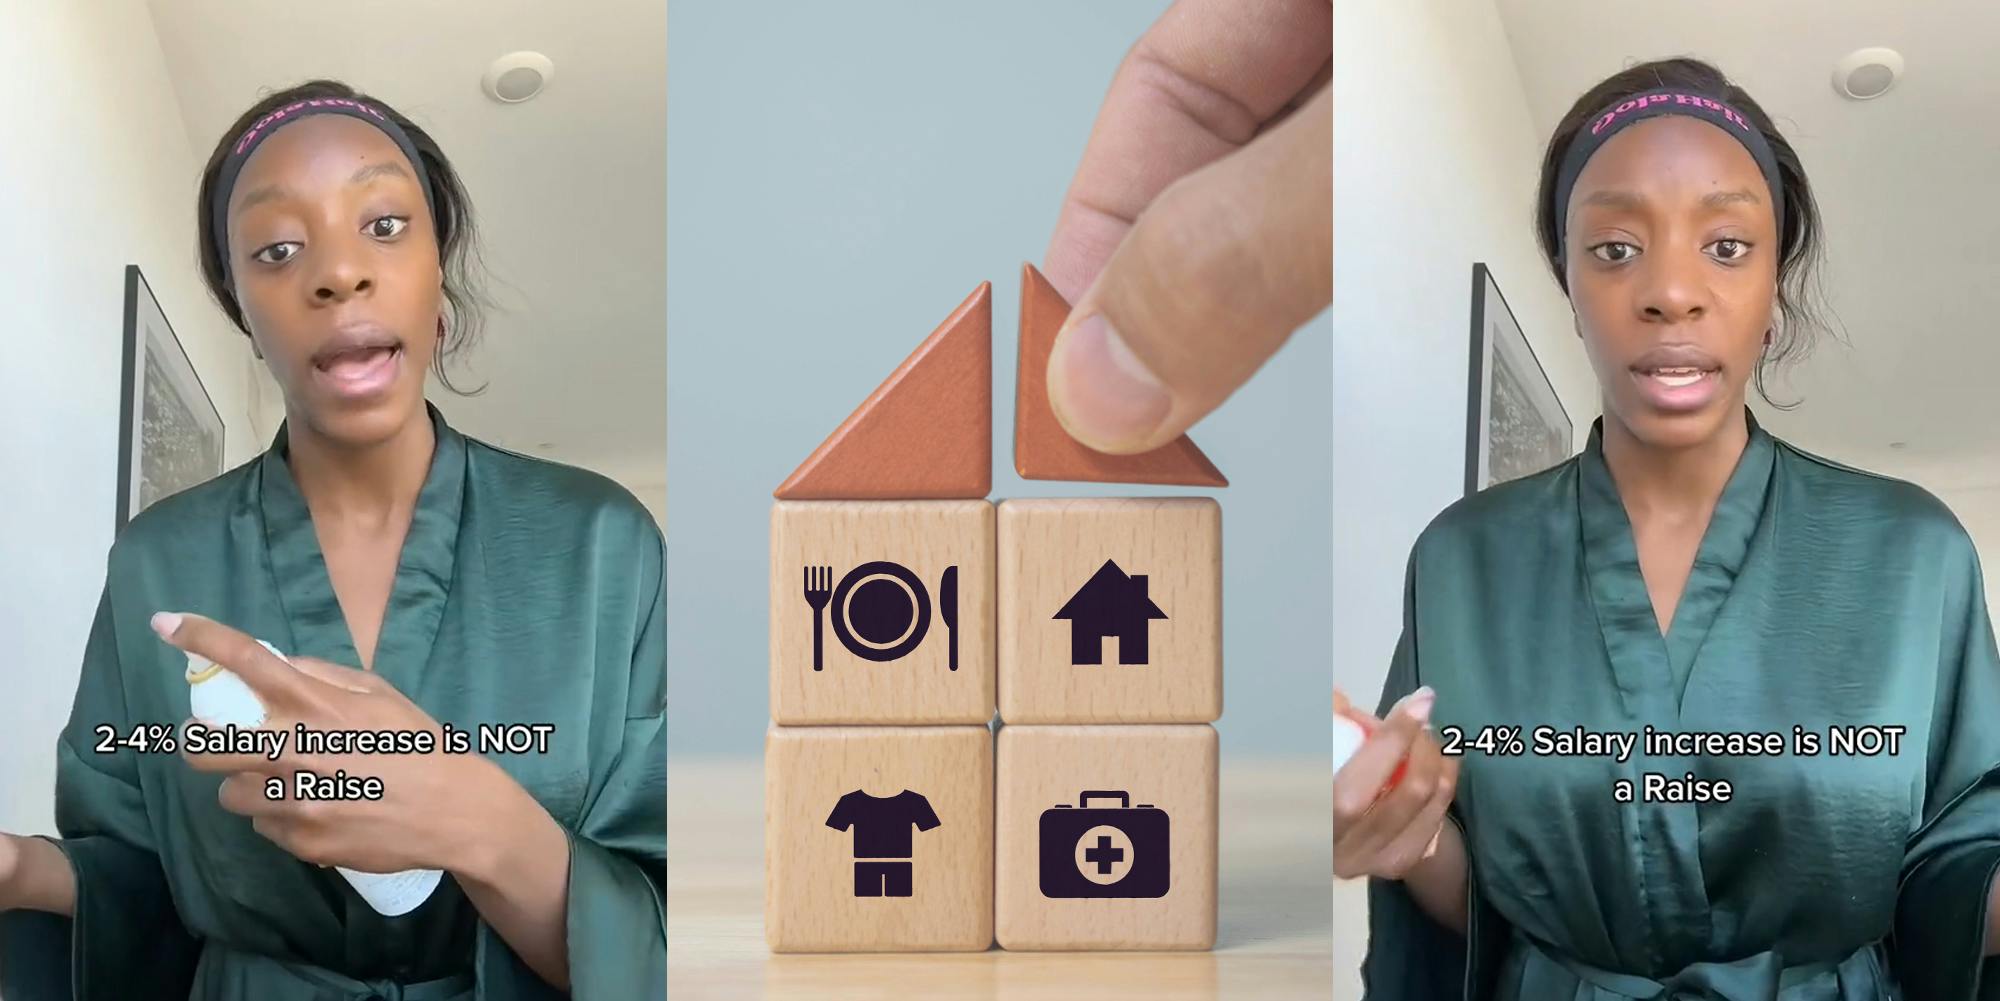 woman speaking with caption "2-4% Salary increase in NOT a Raise" (l) wooden blocks with basic human needs with fingers placing roof block in front of grey background col concept (c) woman speaking with caption "2-4% Salary increase in NOT a Raise" (r)